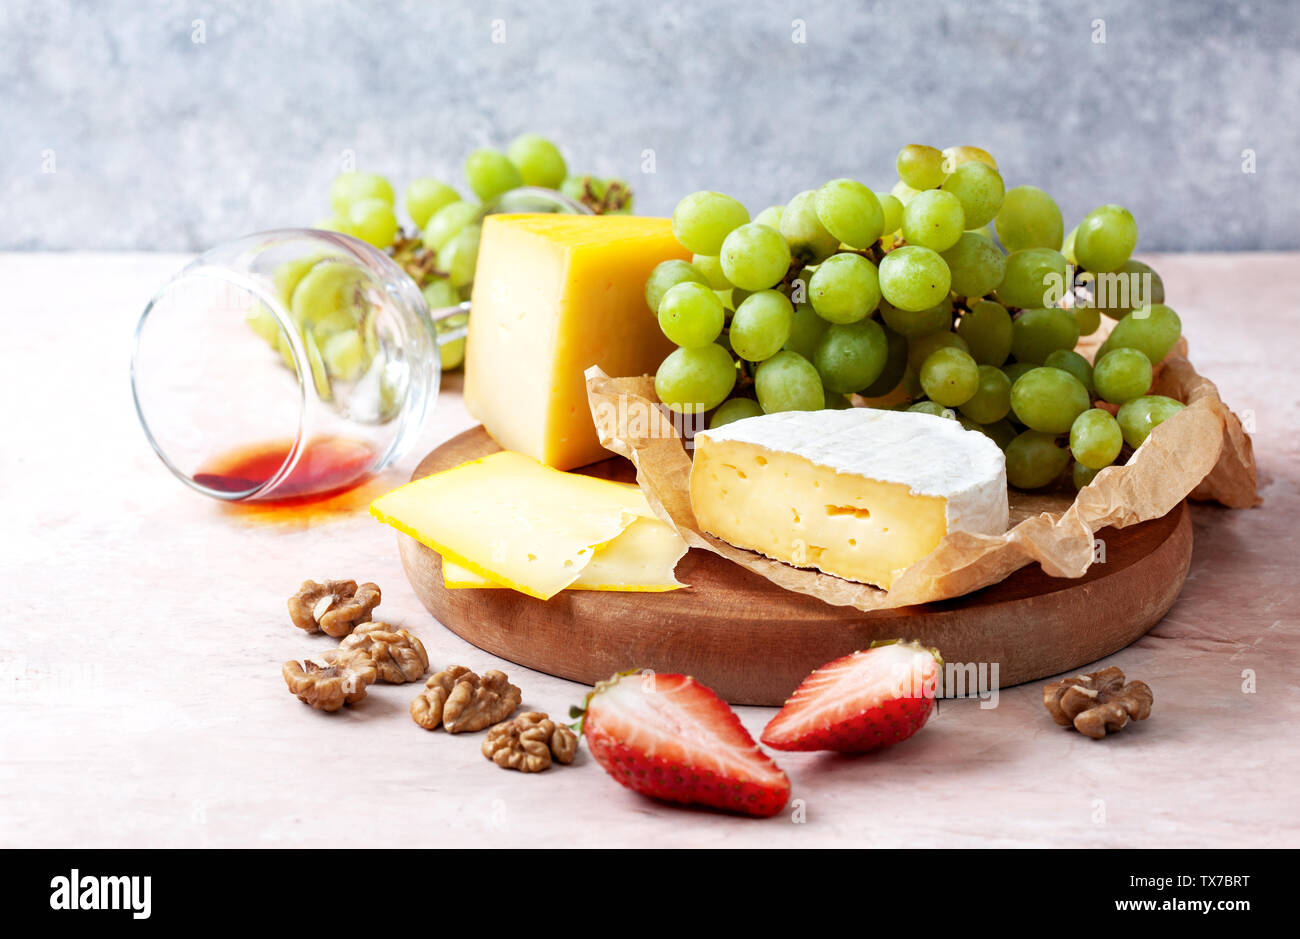 different cheeses with strawberries and grapes on a wooden board closeup Stock Photo